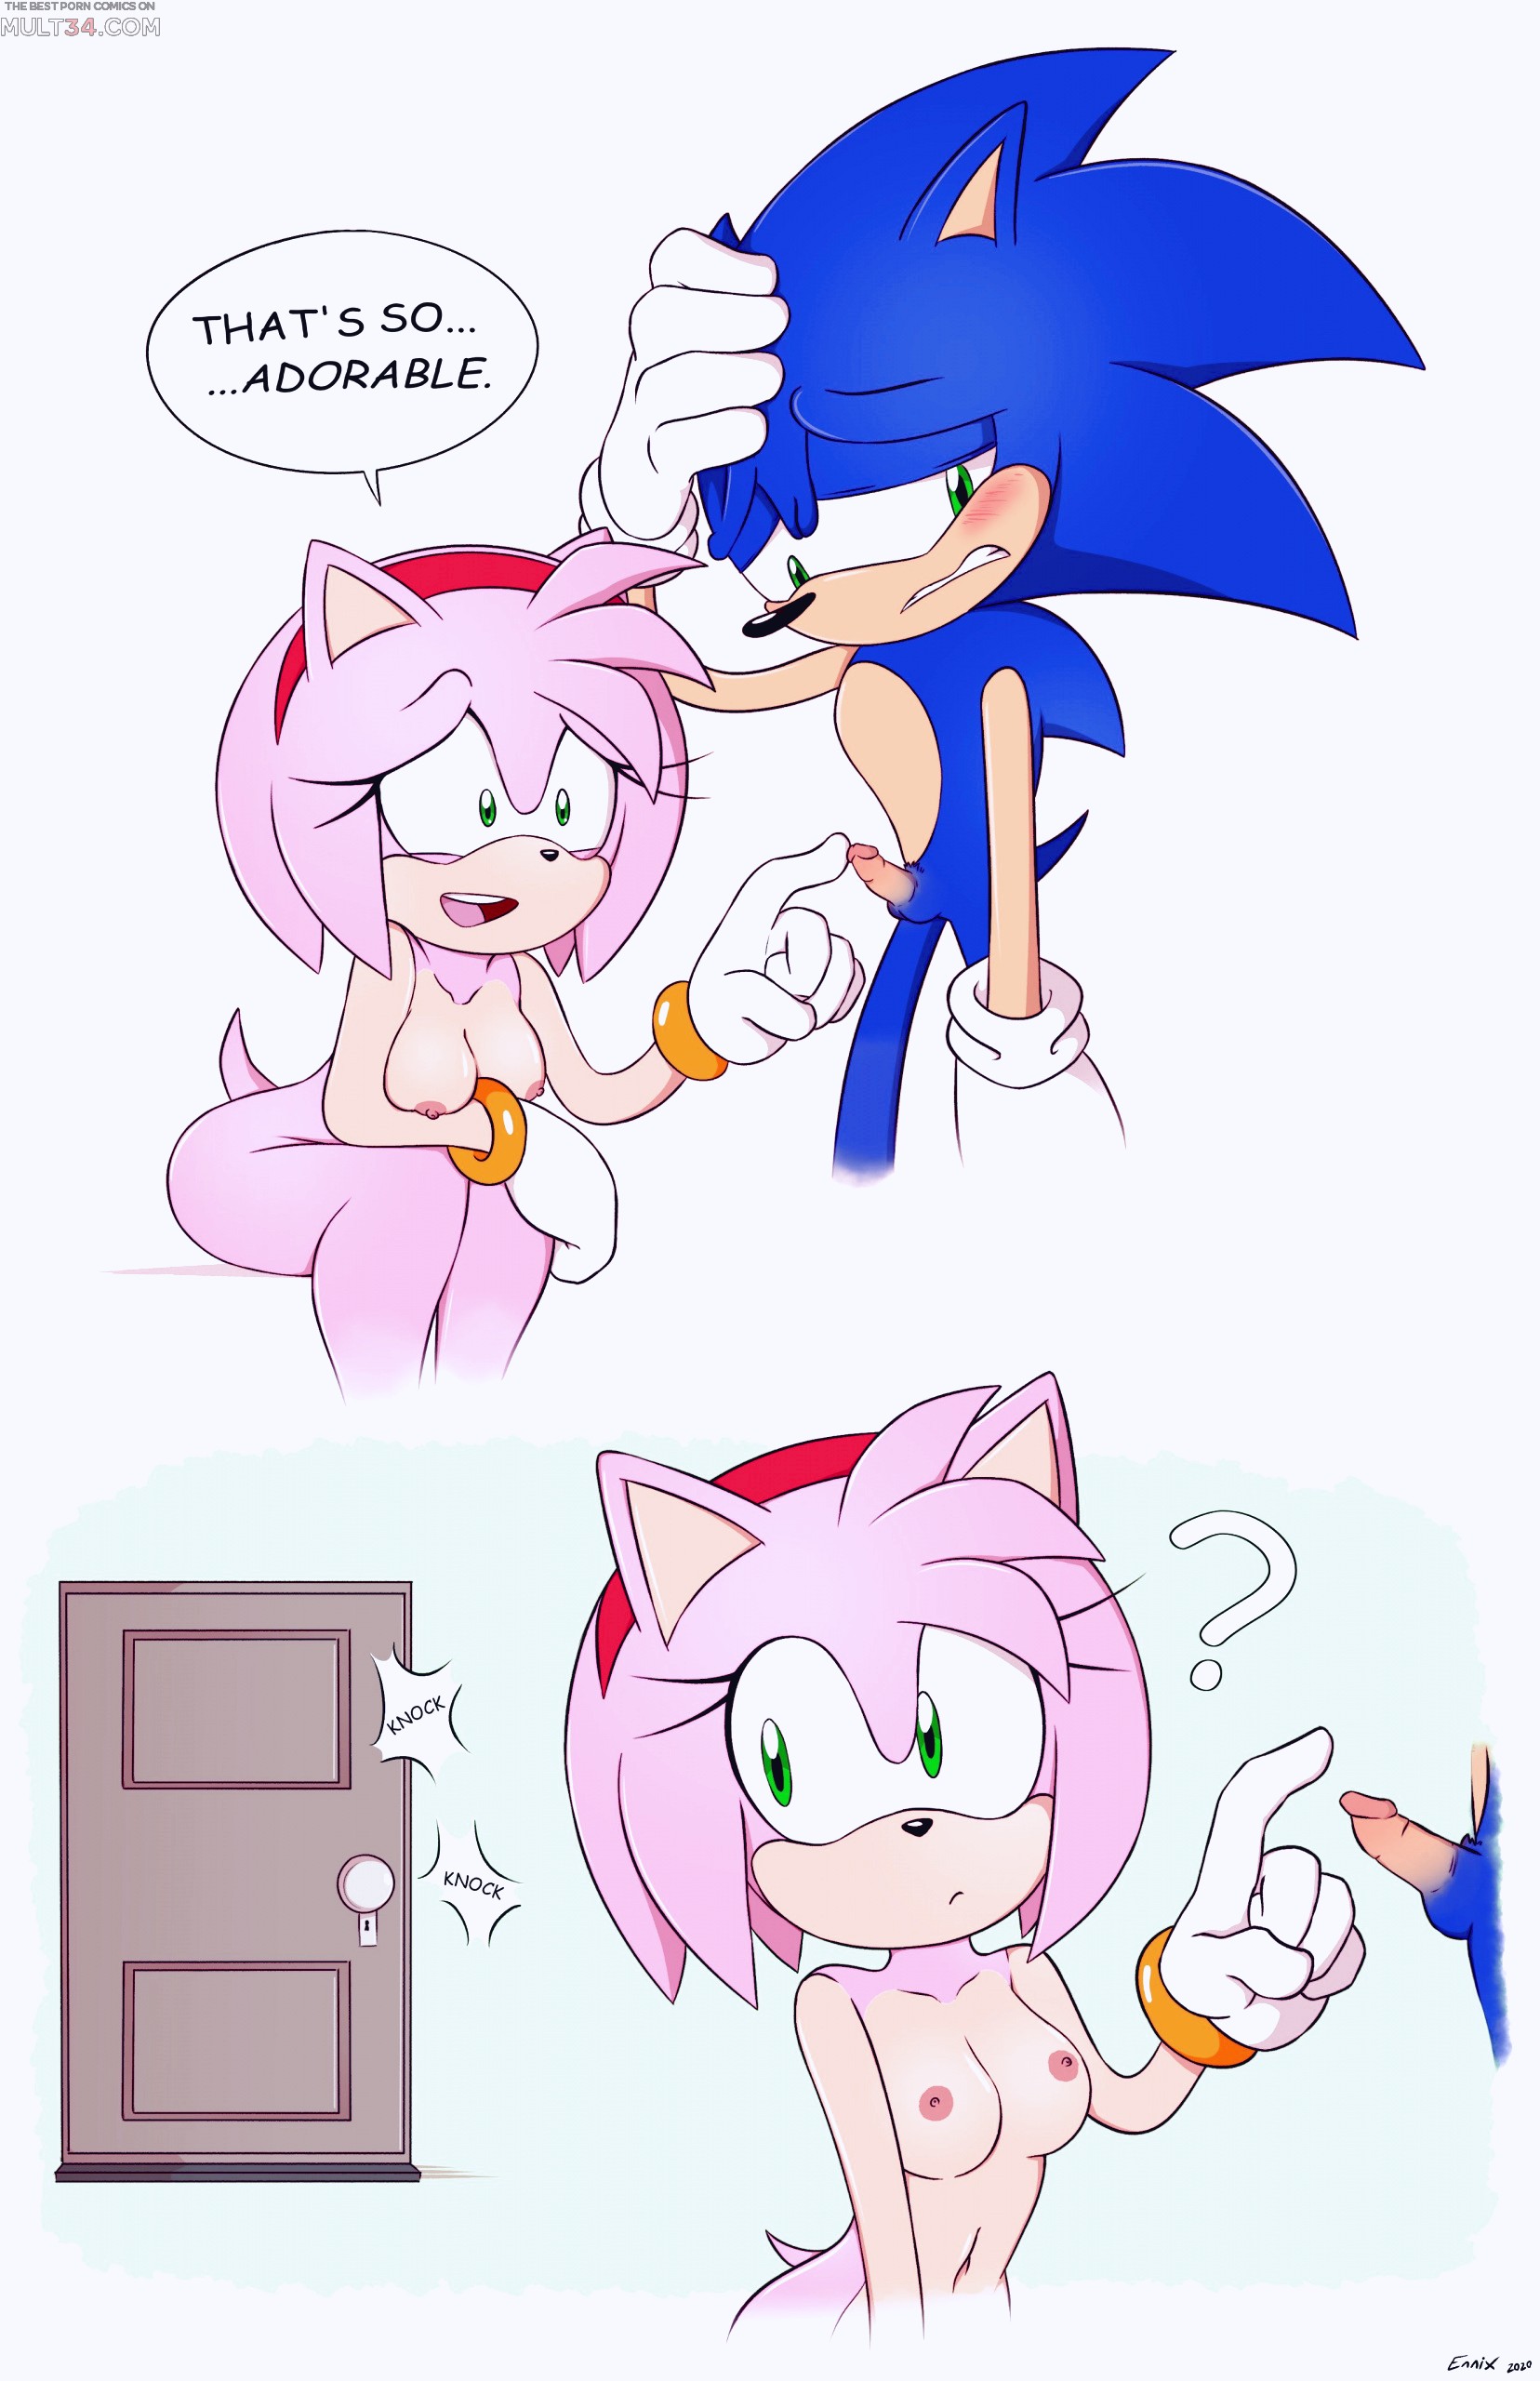 Tails Help porn comic page 1 on category Sonic The Hedgehog